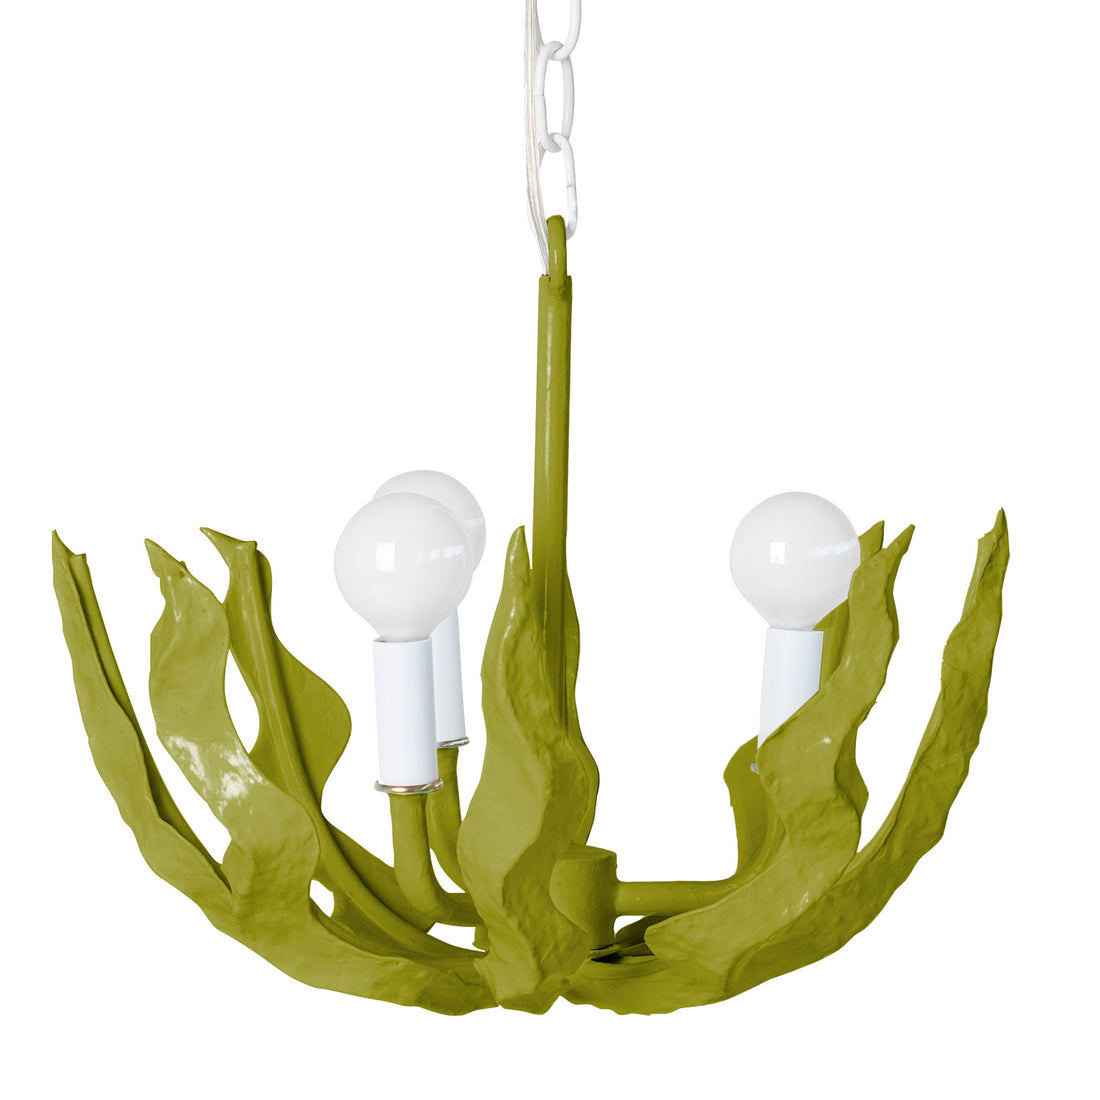 green seaweed light by stray dog designs, made from paper mache